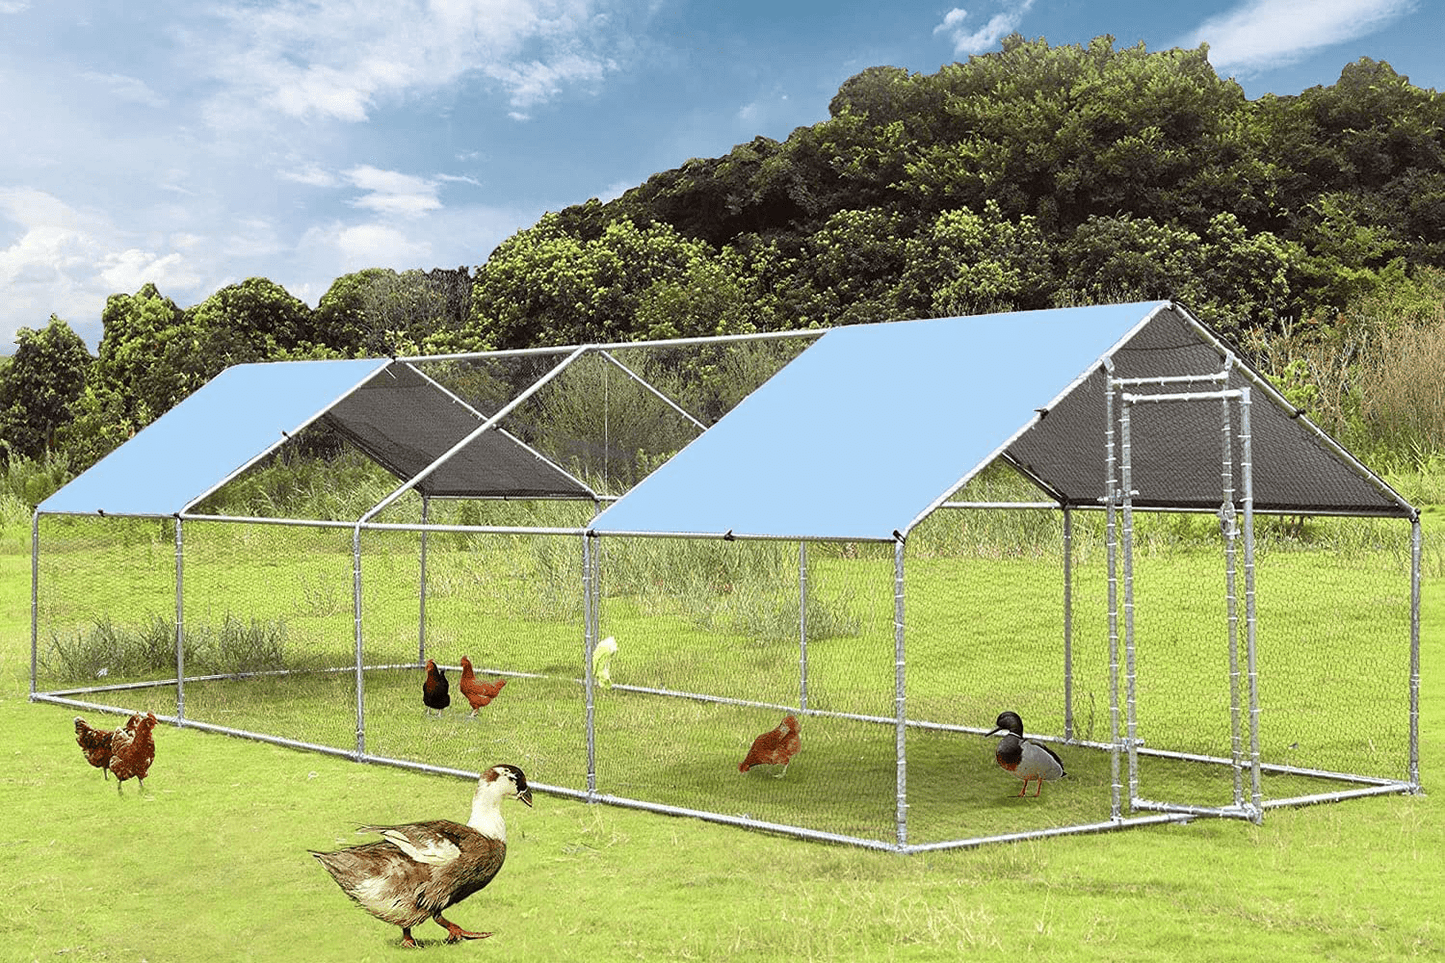 1.25” Tube Chicken Coop Run Large Metal Chicken Pen Outdoor Walkin Chicken Runs for Yard Large Rabbits Habitat Spire Shaped Poultry Cage with Waterproof Cover for Backyard Farm(9.8’L X 13.1’W X 6.4’H) Animals & Pet Supplies > Pet Supplies > Dog Supplies > Dog Kennels & Runs Catrimown Spire 9.8’L x 26.2’W x 6.4’H 